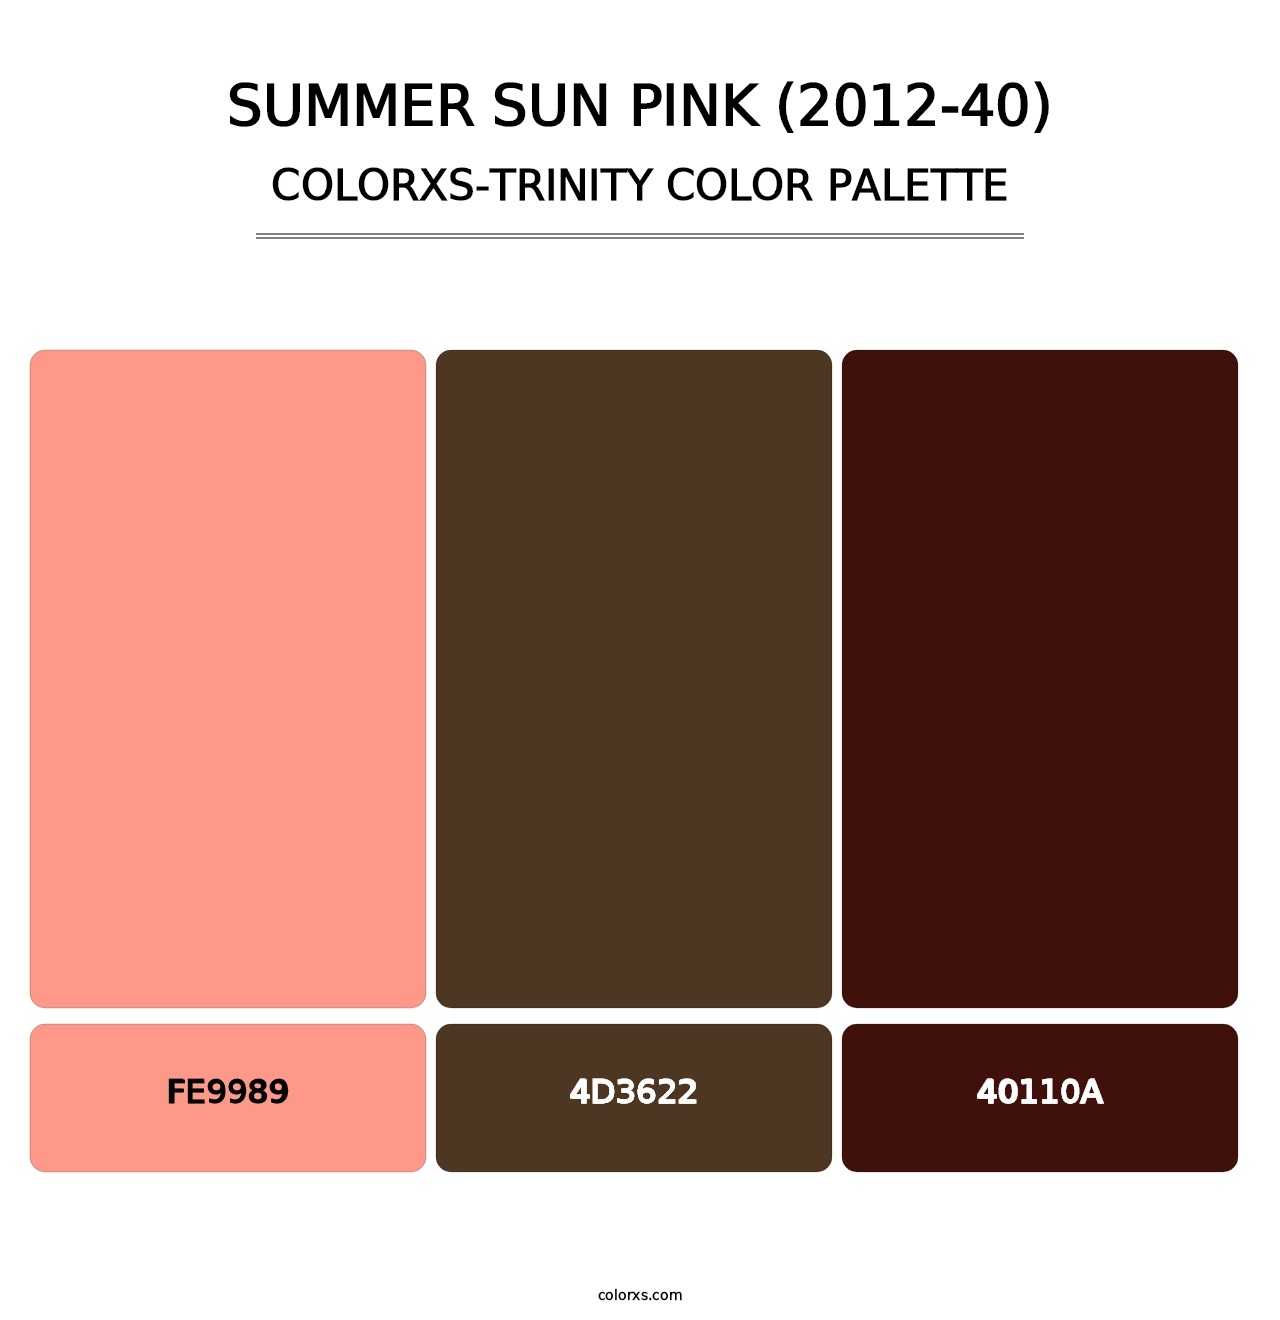 Summer Sun Pink (2012-40) - Colorxs Trinity Palette